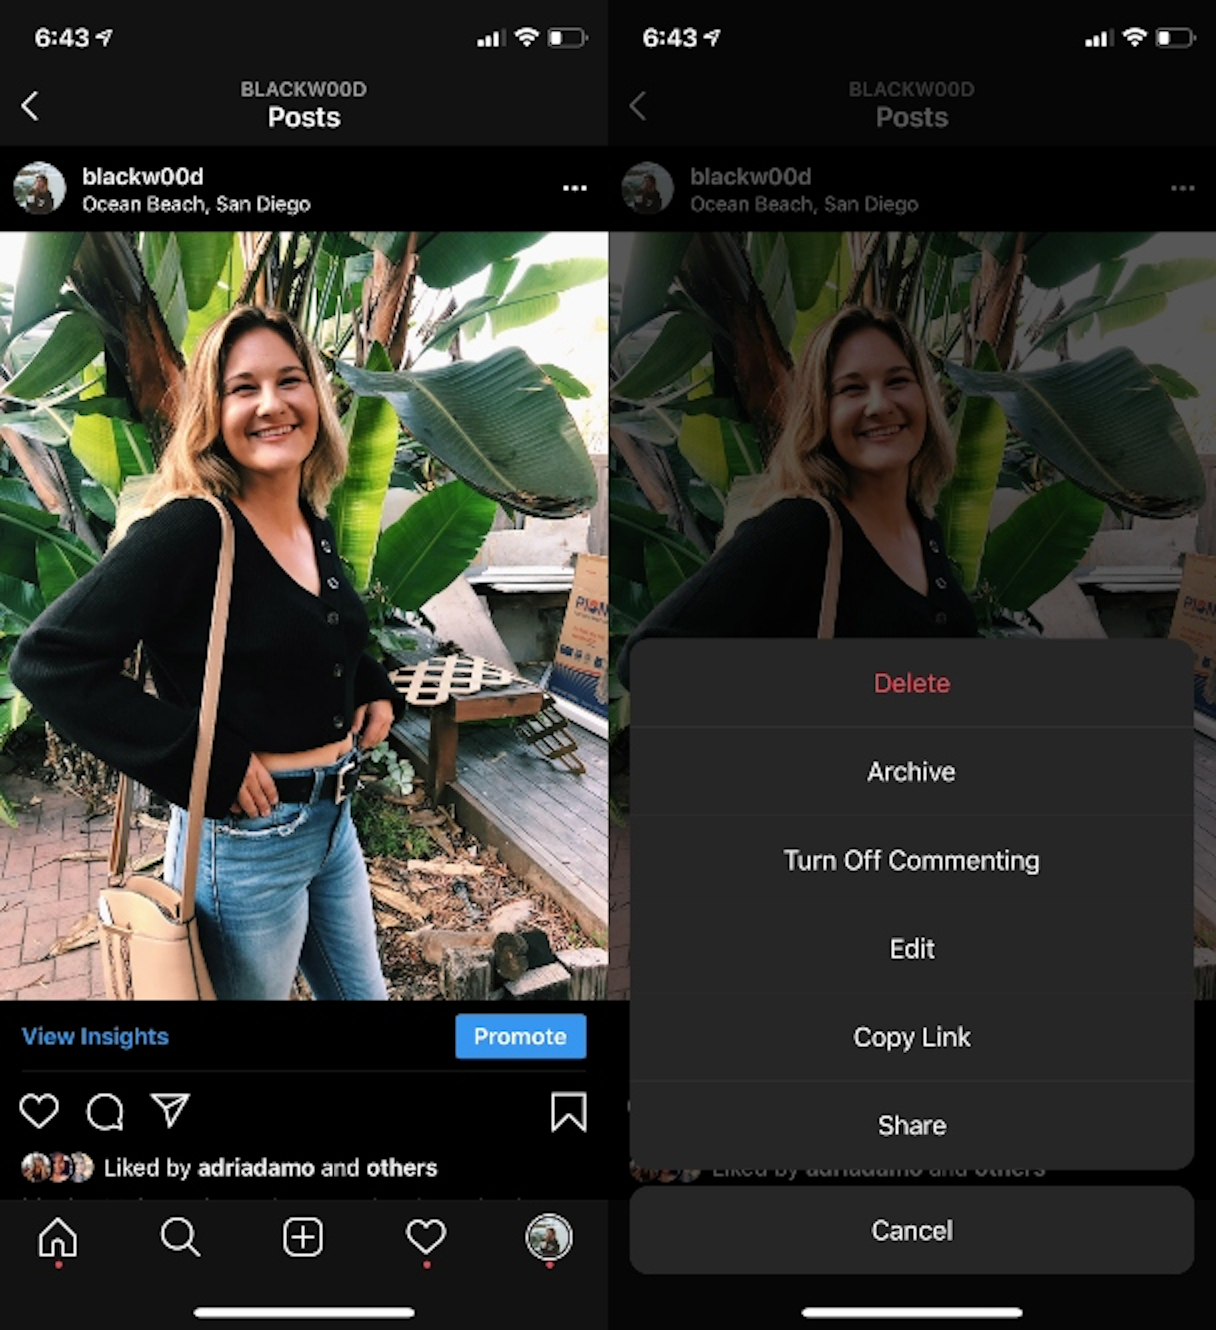 What is Instagram Archive, and how do I find it on iPhone?